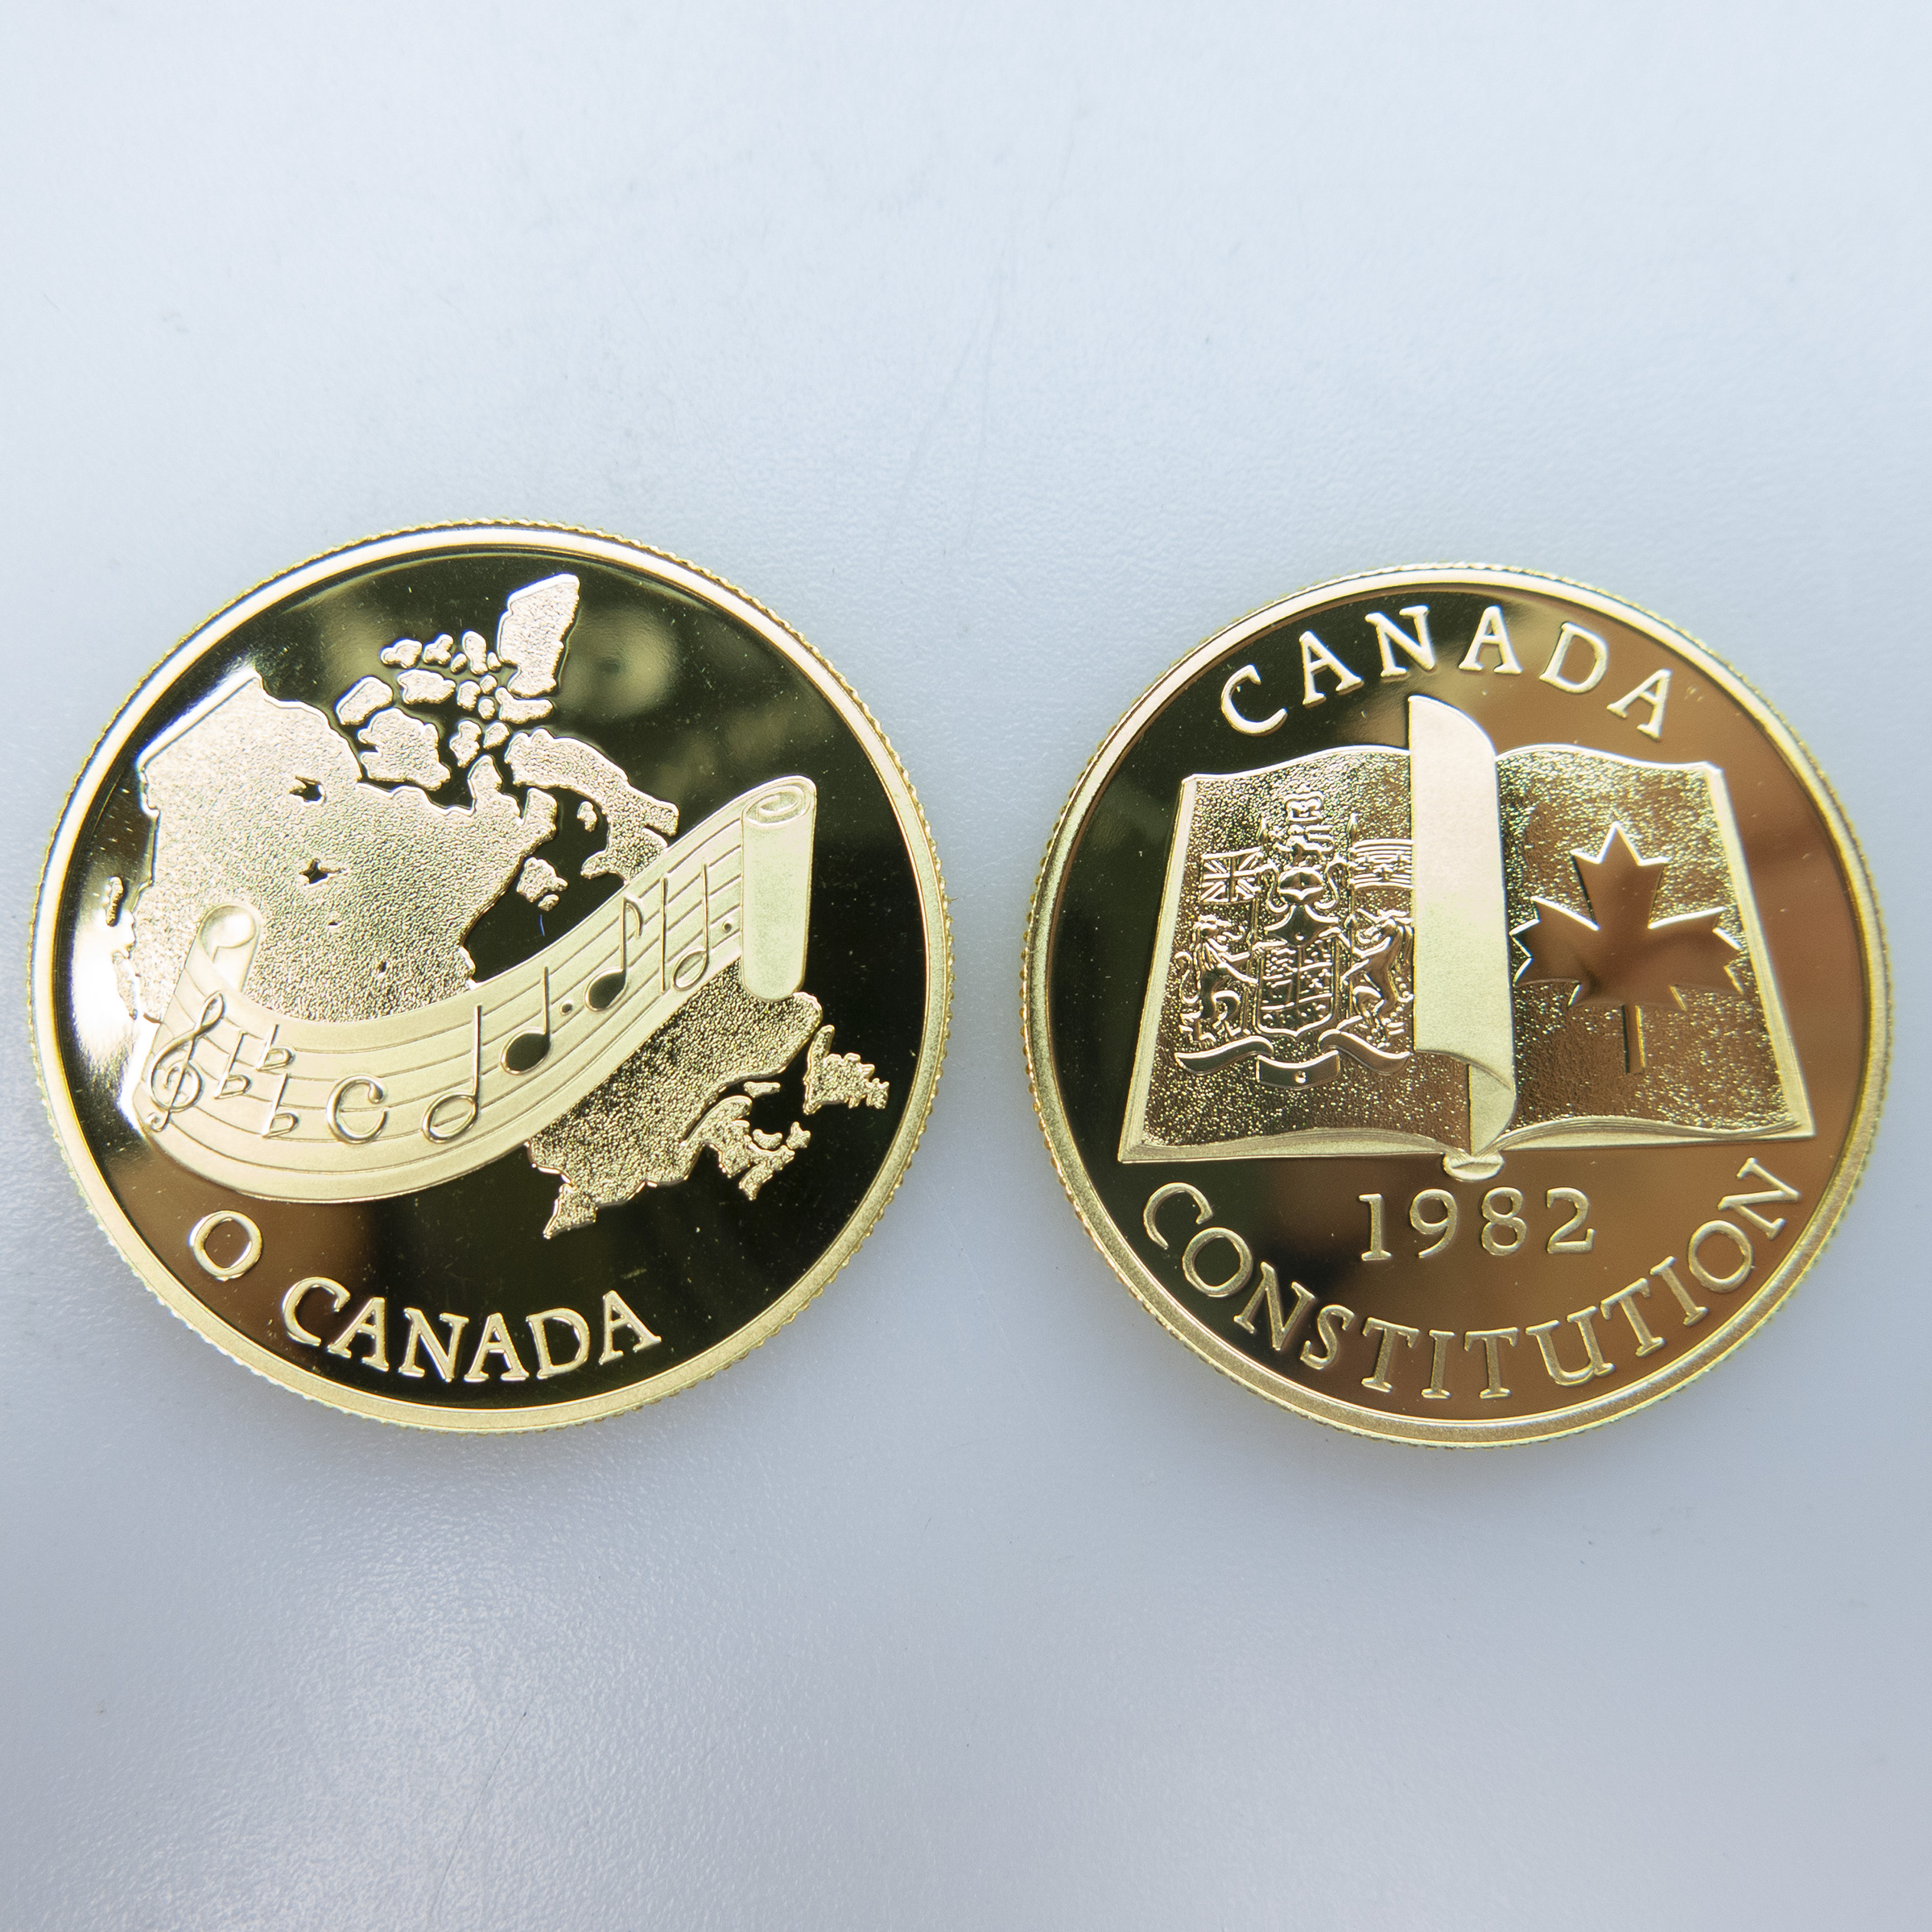 2 Canadian $100 Gold Coins, 1981 & 1982